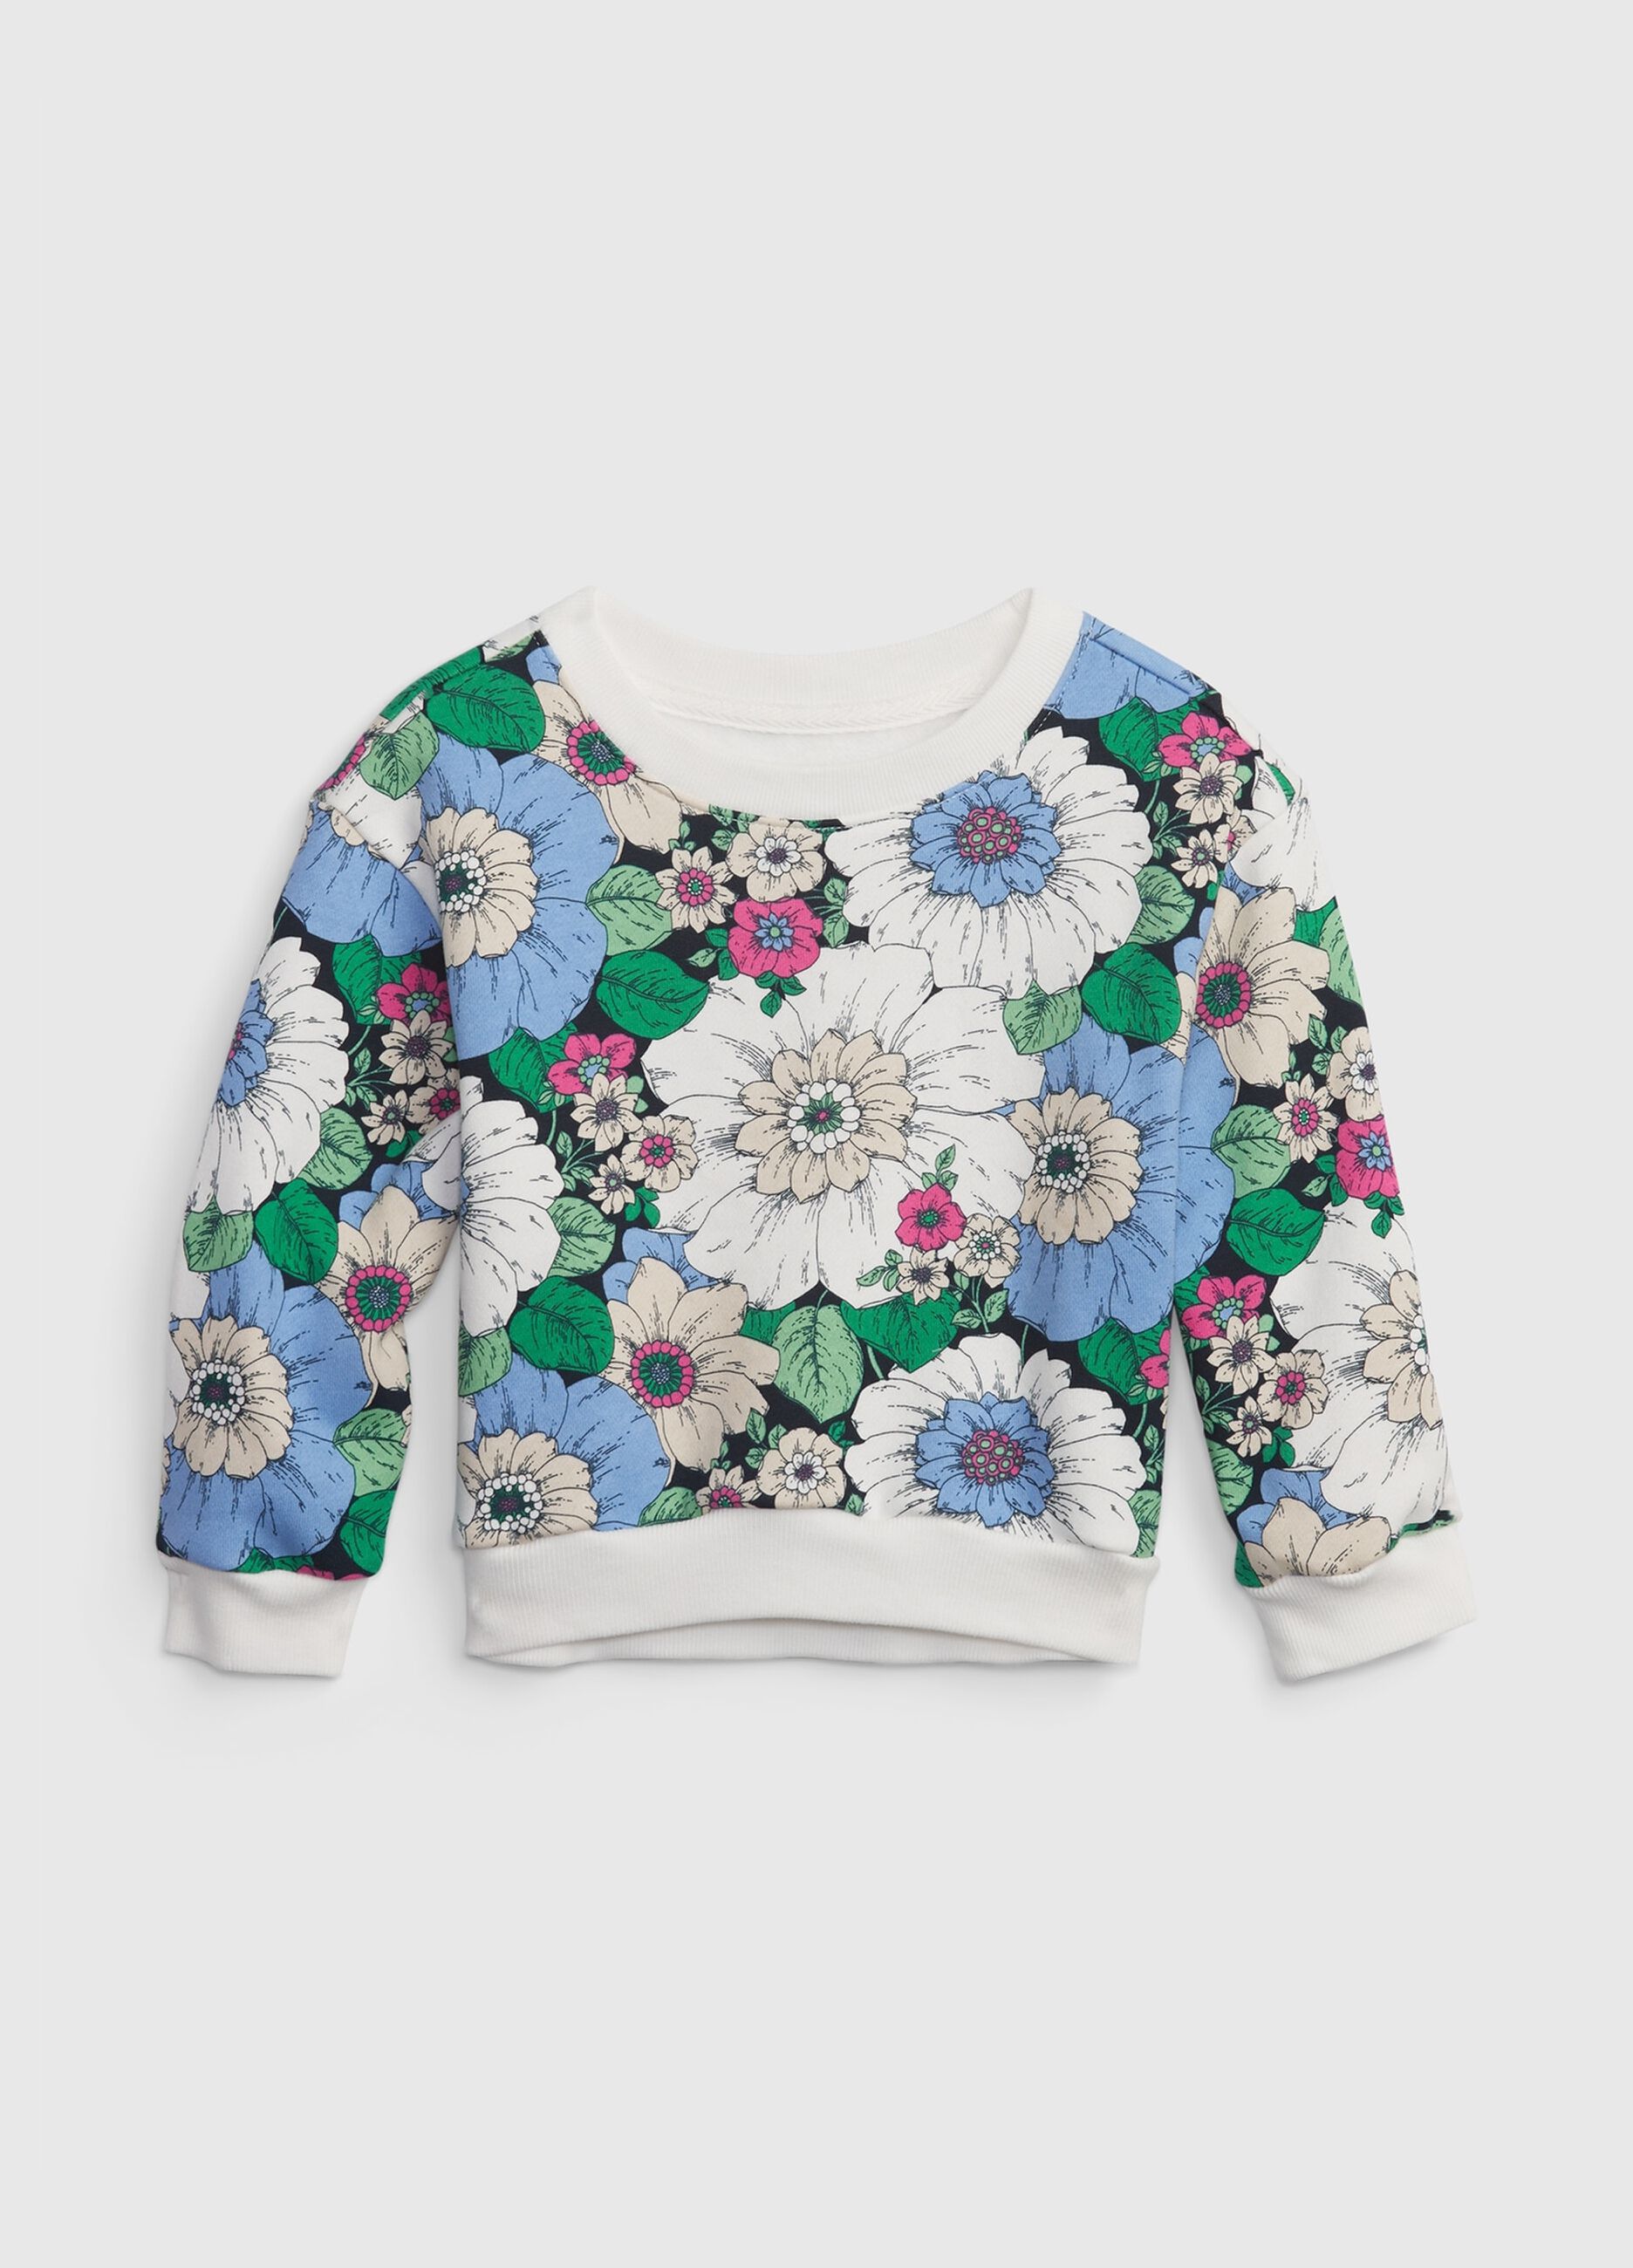 Sweatshirt with round neck and floral pattern